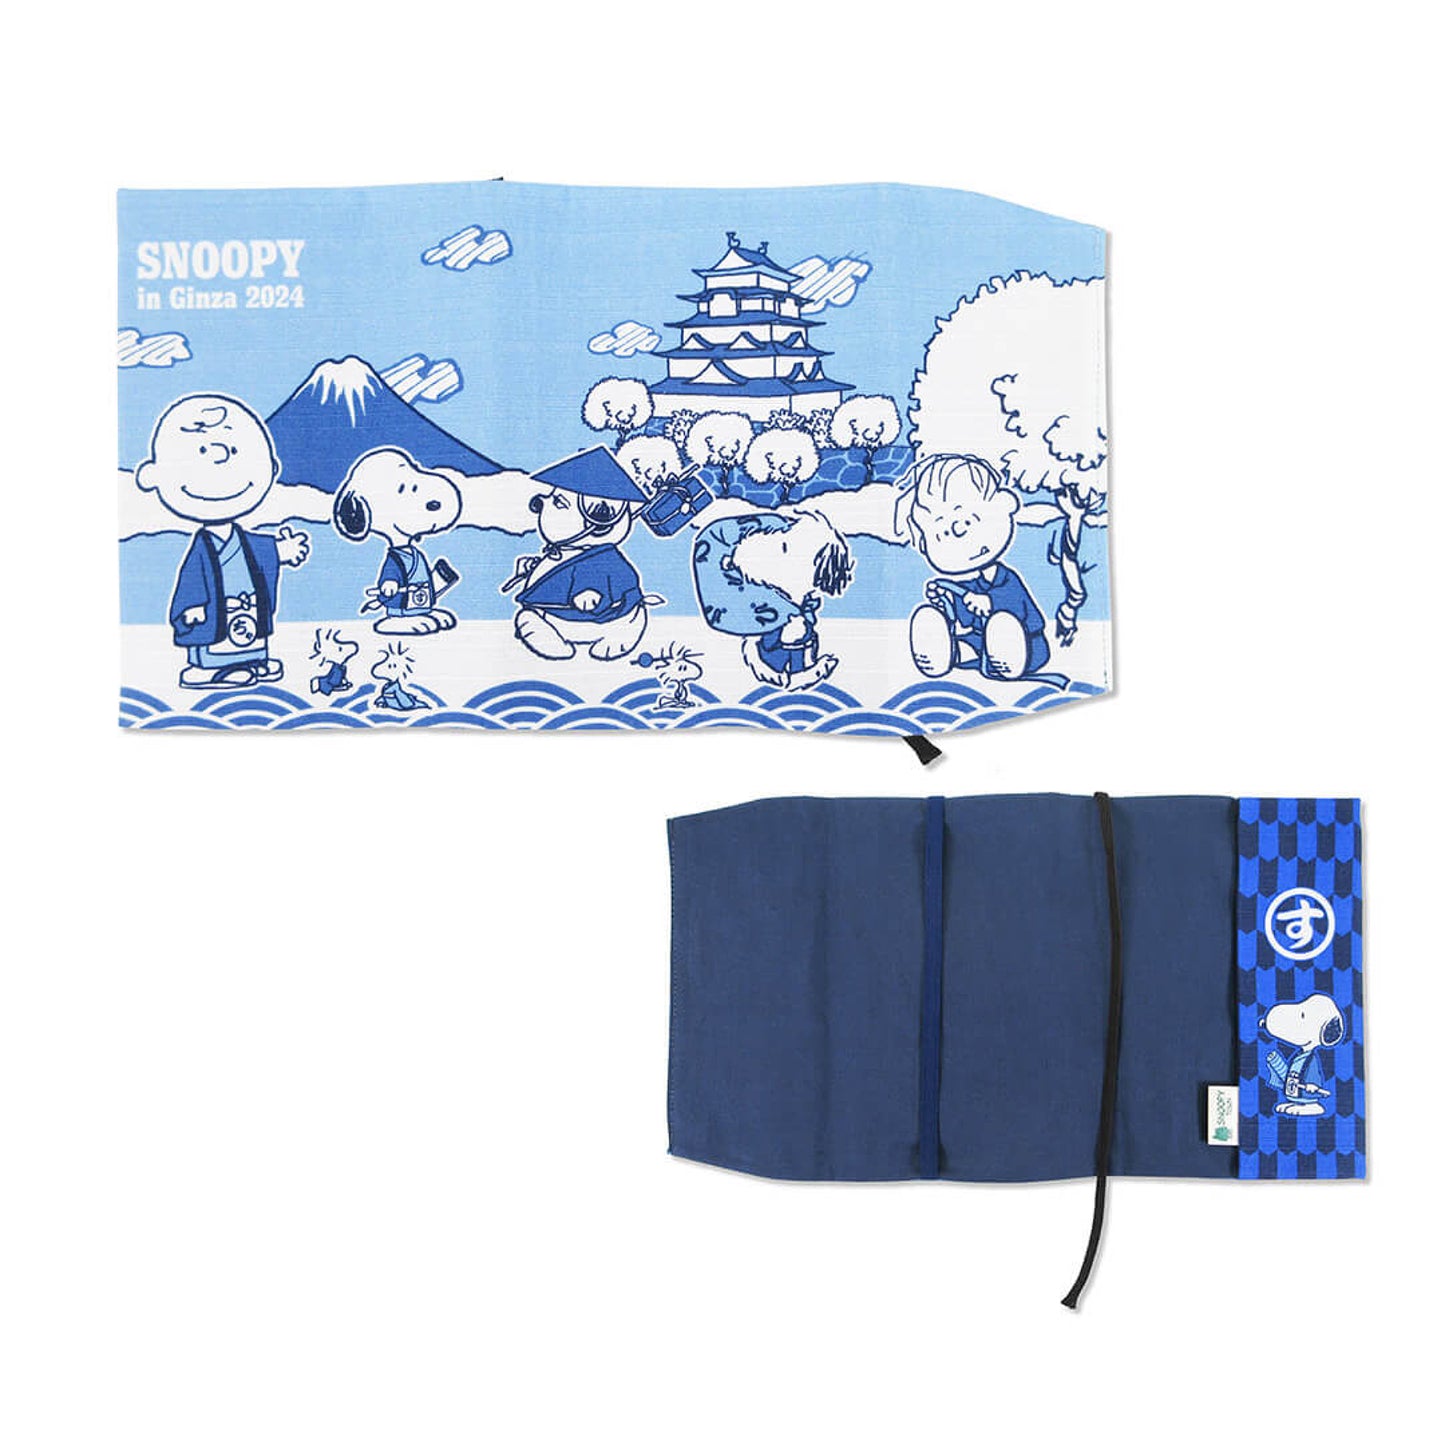 【Pre-order】Snoopy in Ginza Exhibition Japanese style series